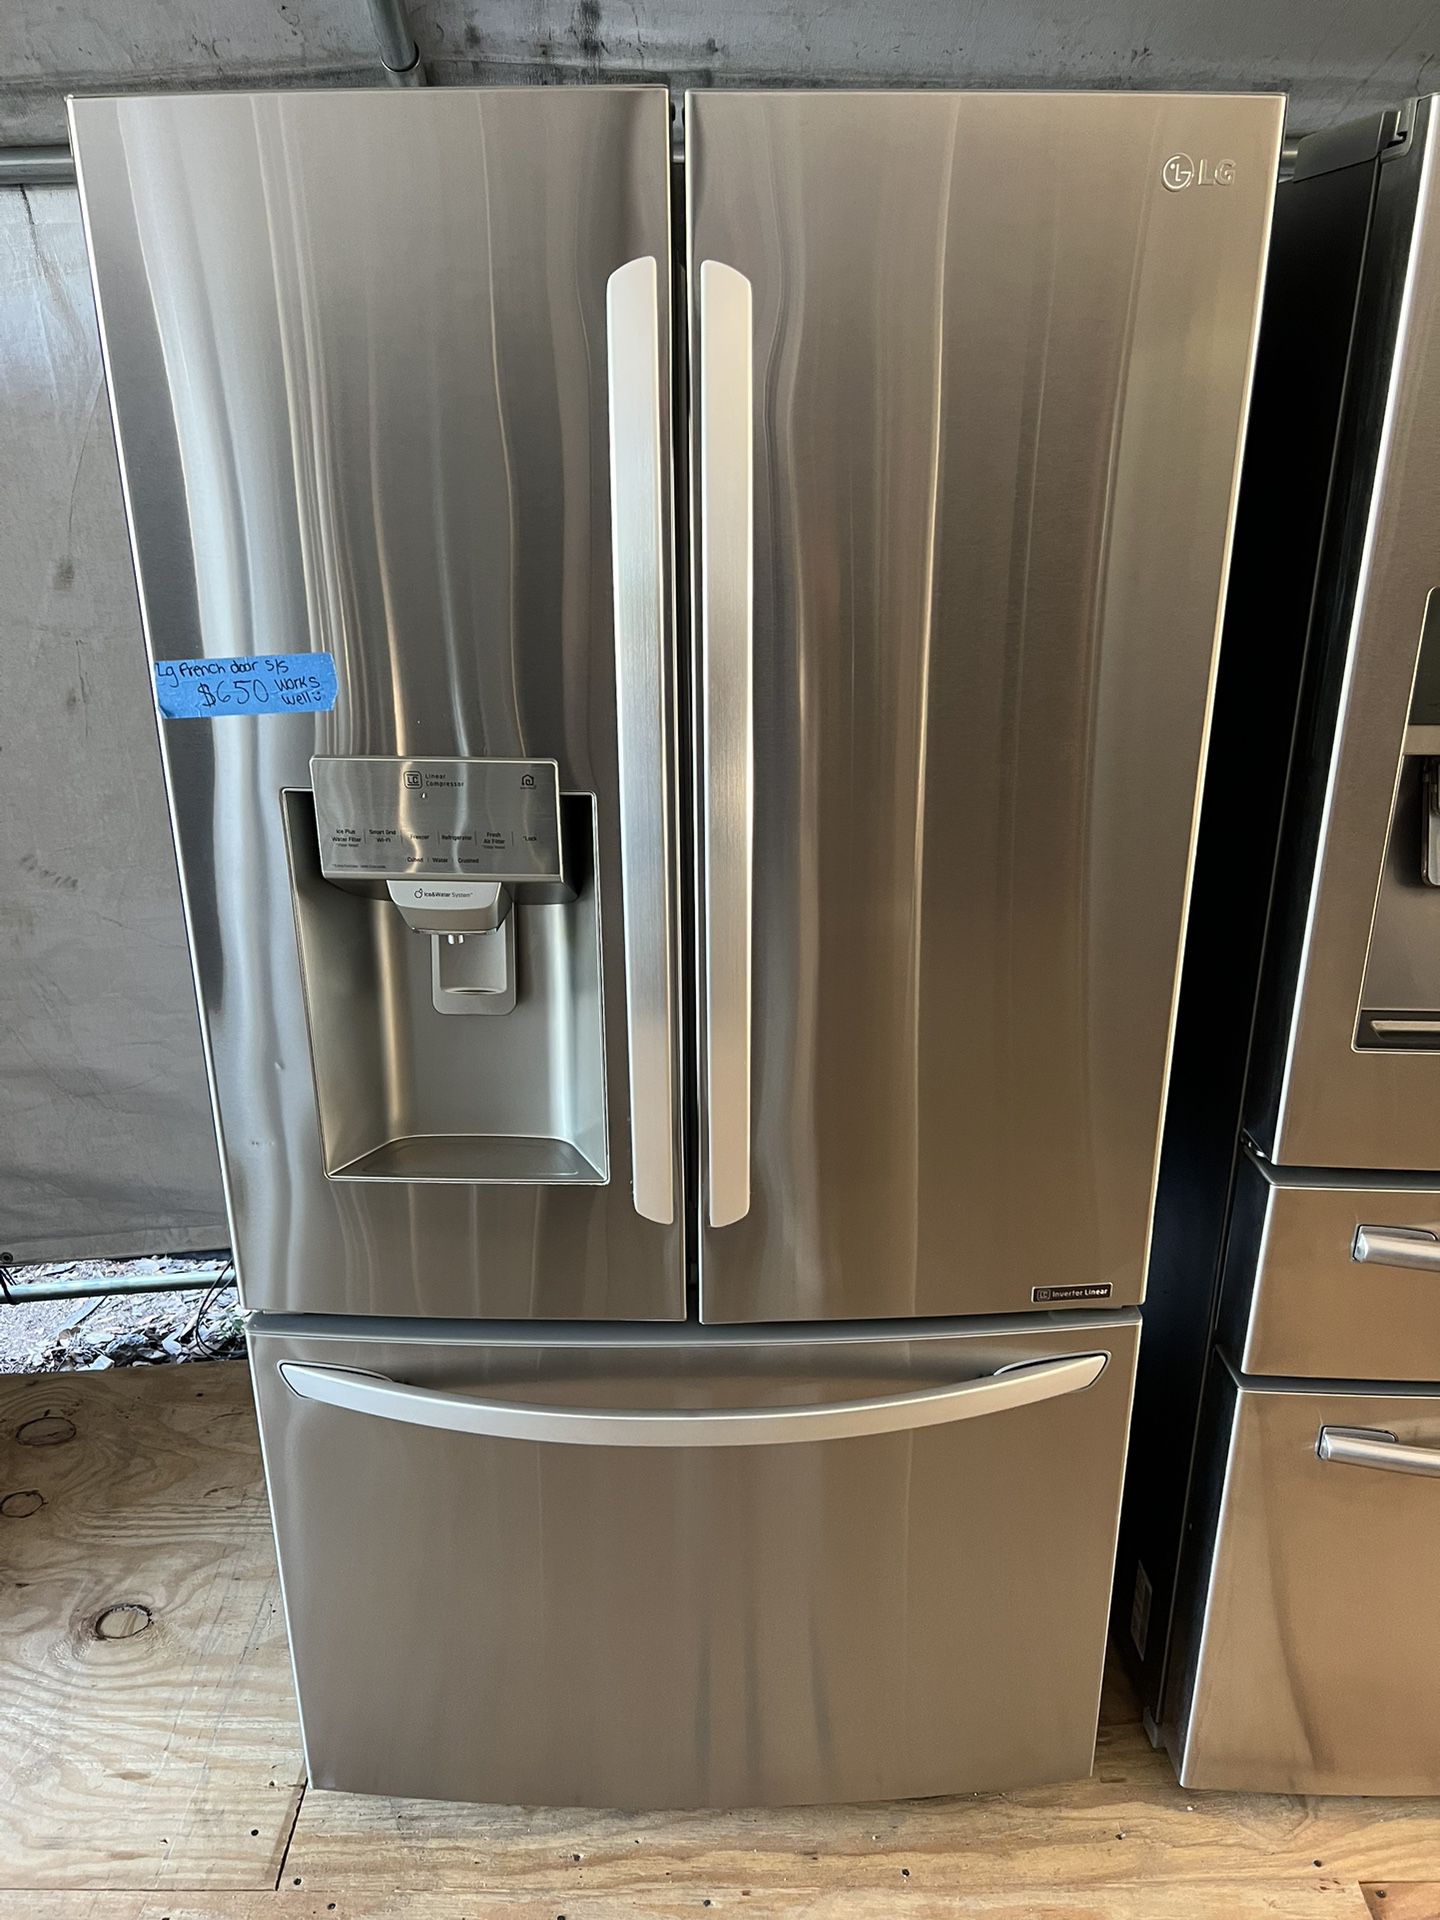 Lg French Door Refrigerator   60 day warranty/ Located at:📍5415 Carmack Rd Tampa Fl 33610📍